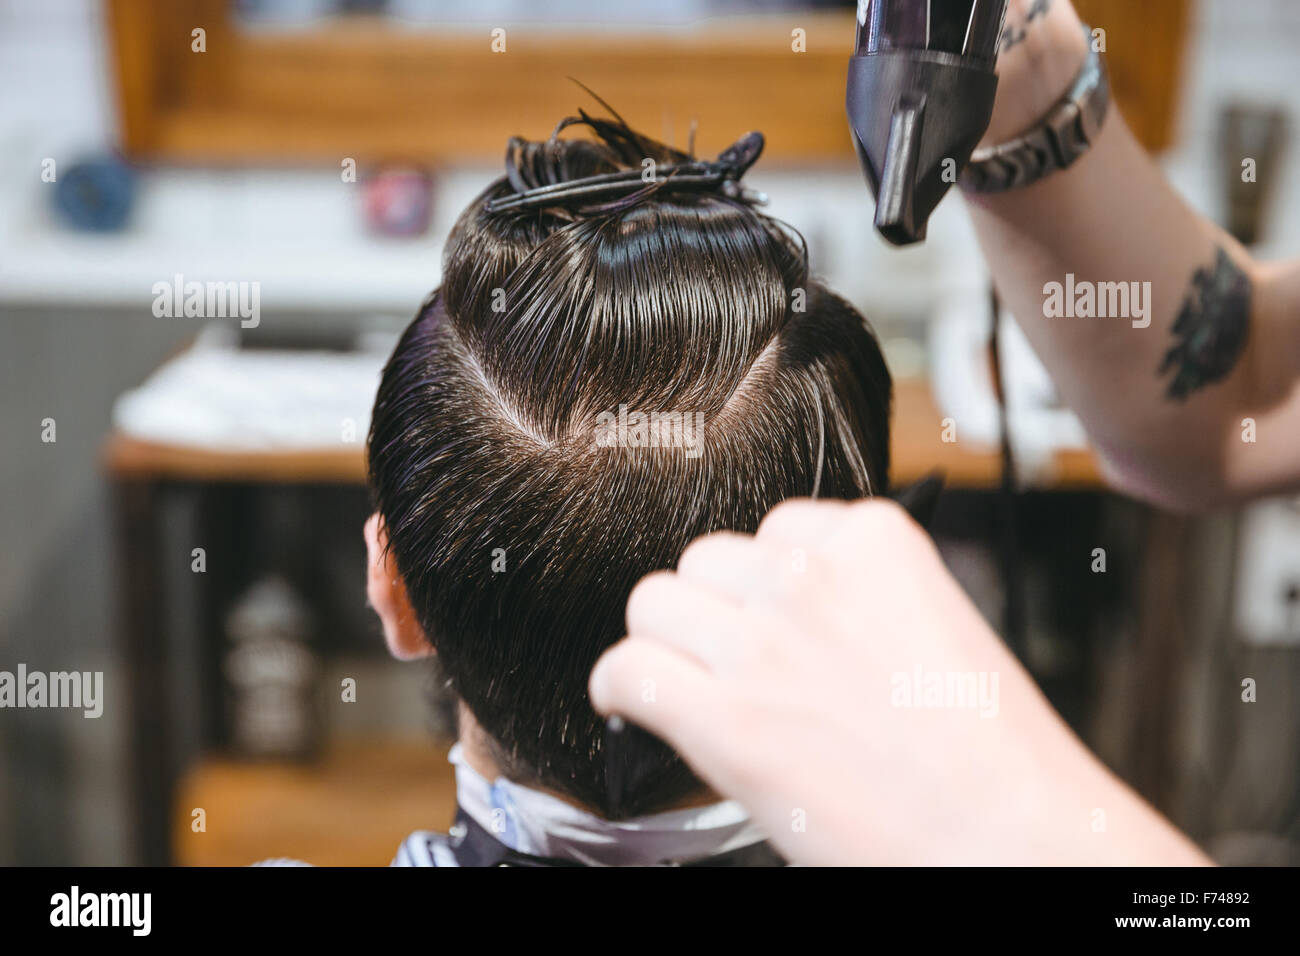 Closeup of hands of hairstylist drying hair of male client using hairdryer and comb in barbershop Stock Photo